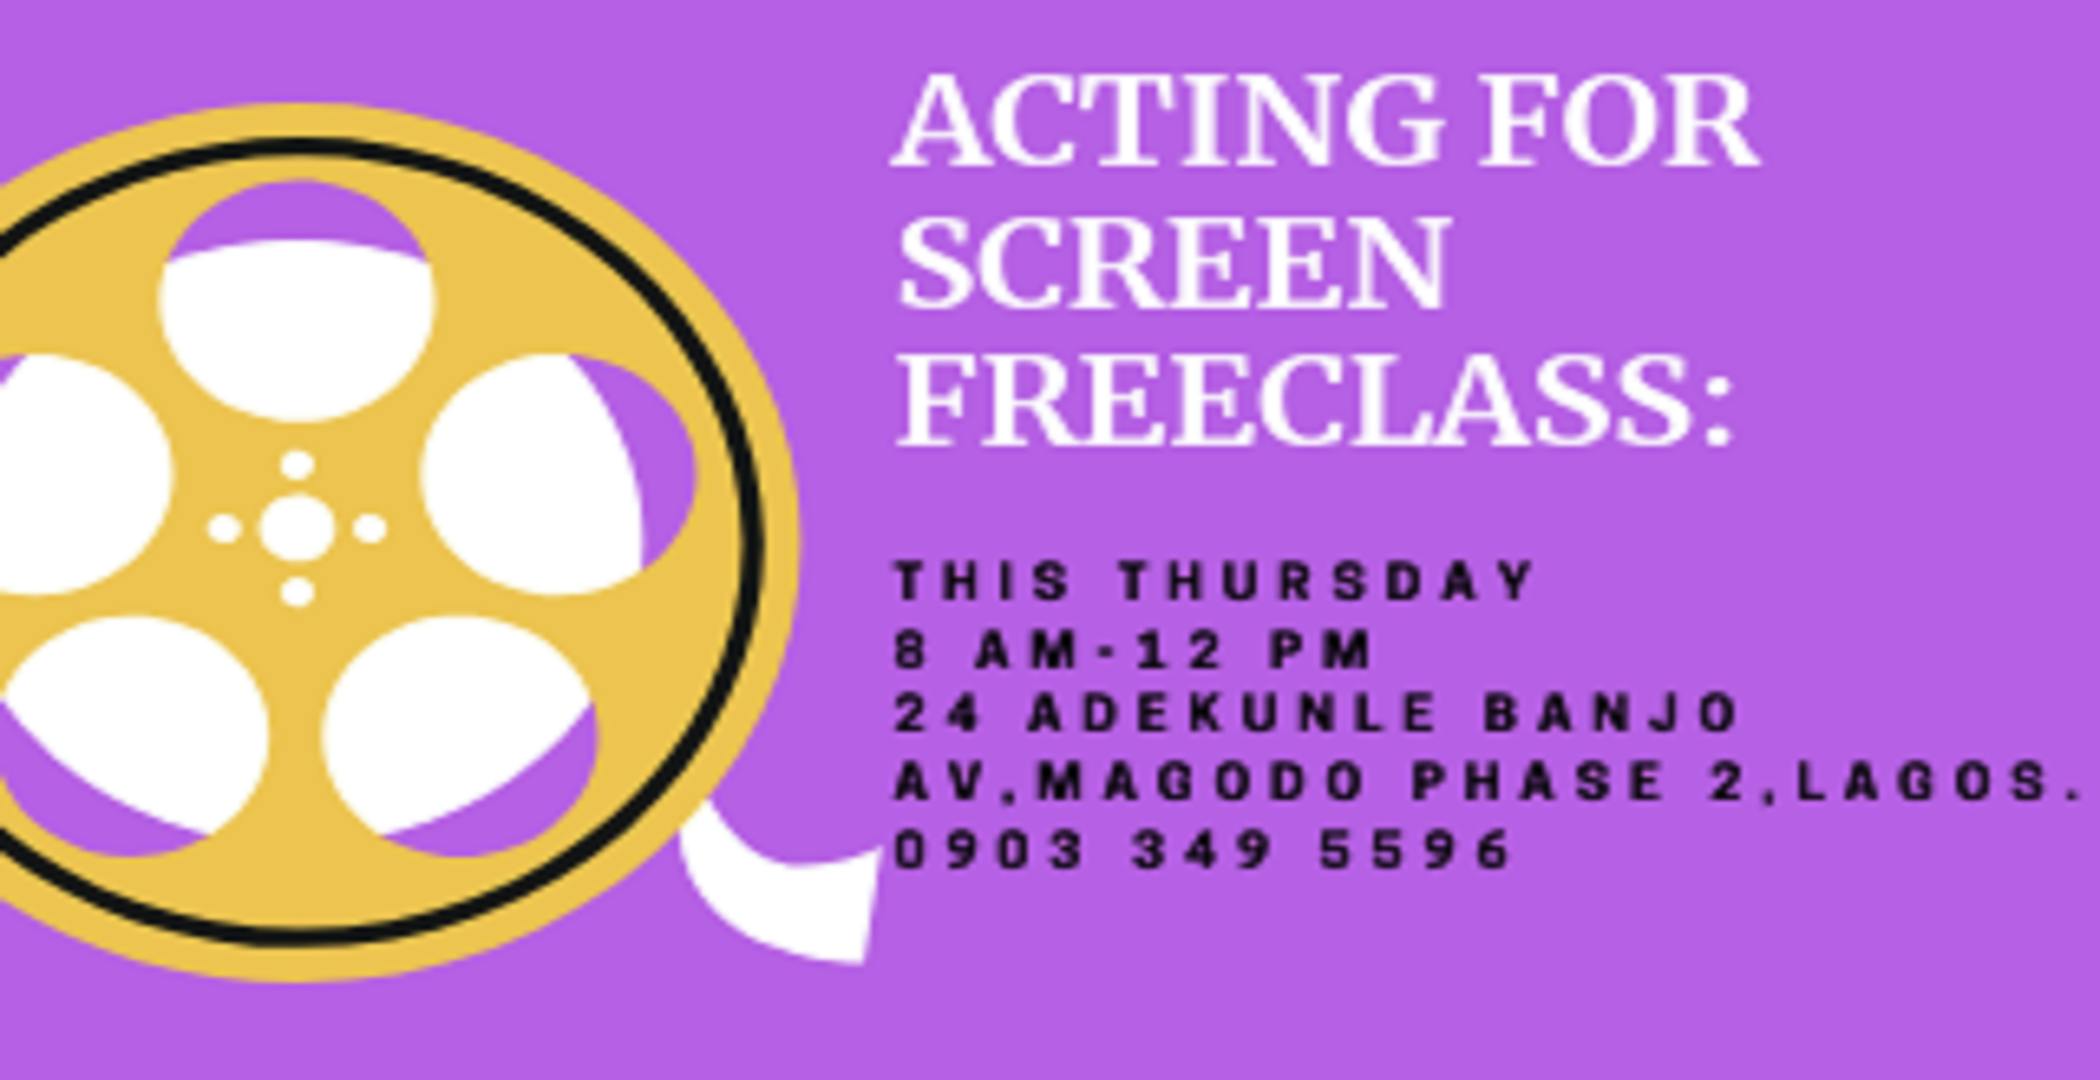 ACTING FOR SCREEN FREECLASS